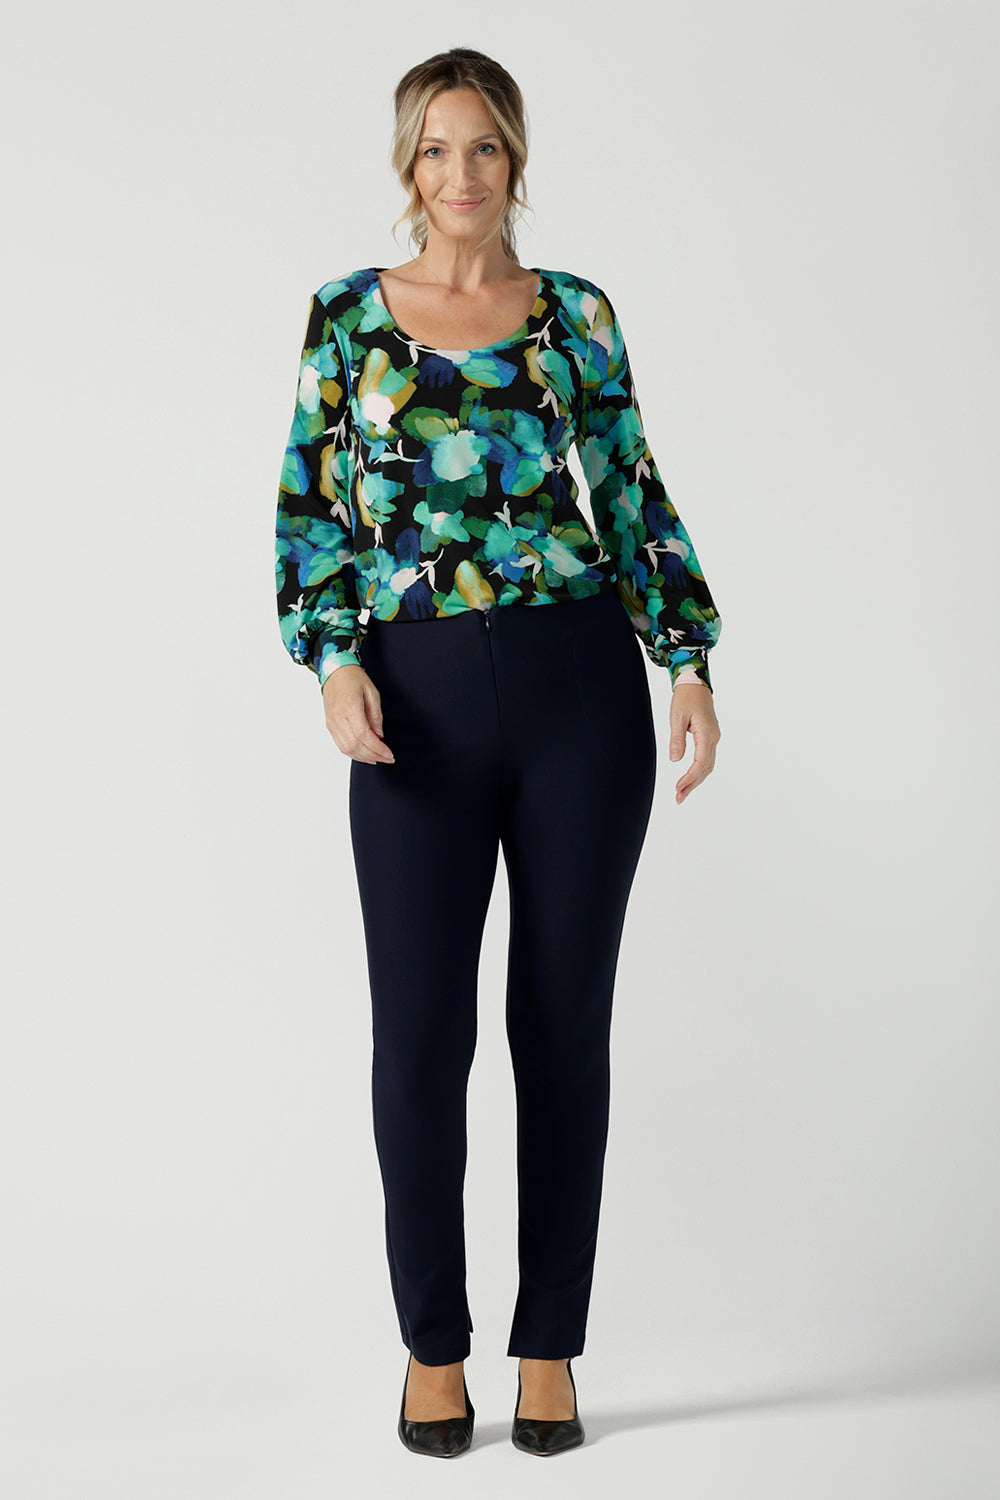 A size 8 woman wears the Jasper top in Canopy. A jersey style in a watercolour green print with balloon sleeves and cuff detail. Round neckline. Styled back with Navy Brooklyn pant in Navy. Made in Australia for women size 8 - 24.